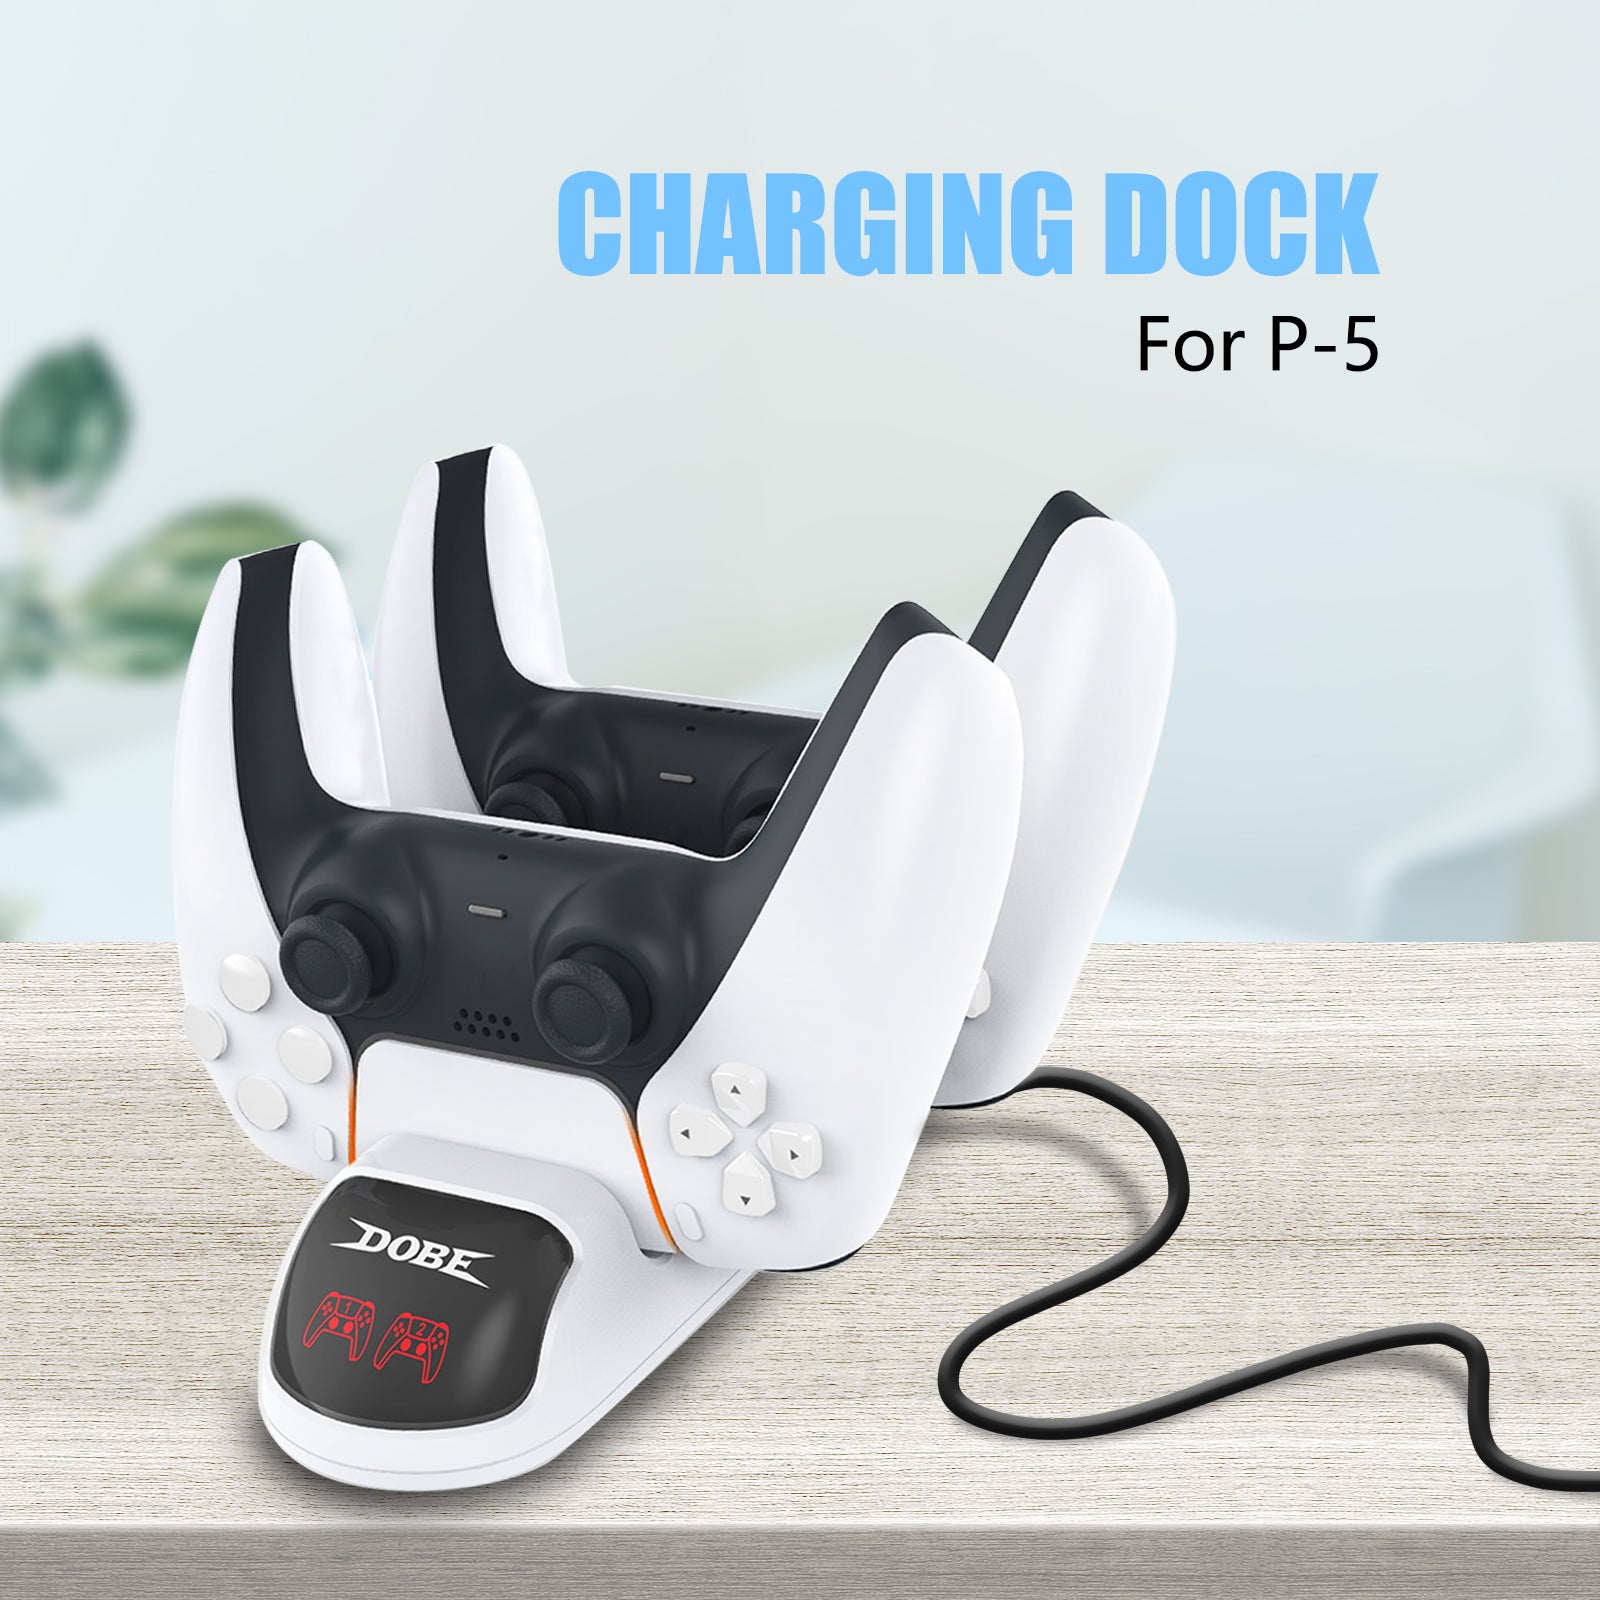  PS5 Controller Charging Station Compatible with PS5  Controller,DOBE Playstation 5 PS5 Controller Charger Dock Station with Fast  Charging Speed in 2 Hours,PS5 Remote Charger Station with Charigng Cable :  Video Games